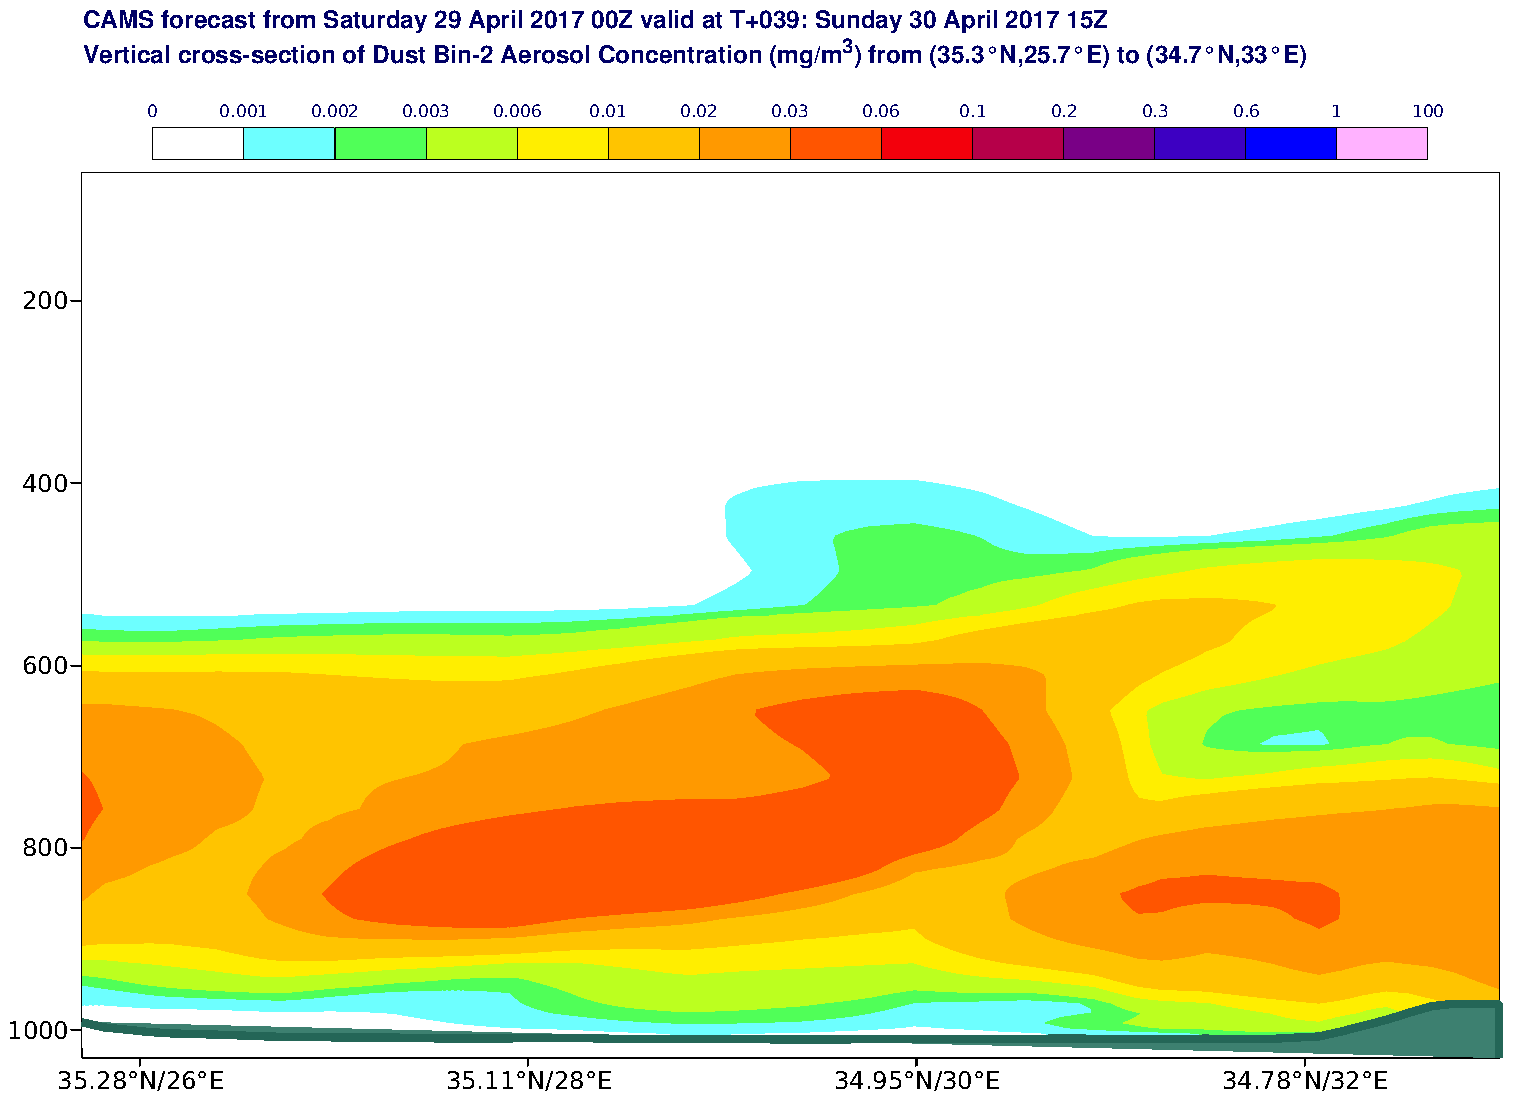 Vertical cross-section of Dust Bin-2 Aerosol Concentration (mg/m3) valid at T39 - 2017-04-30 15:00